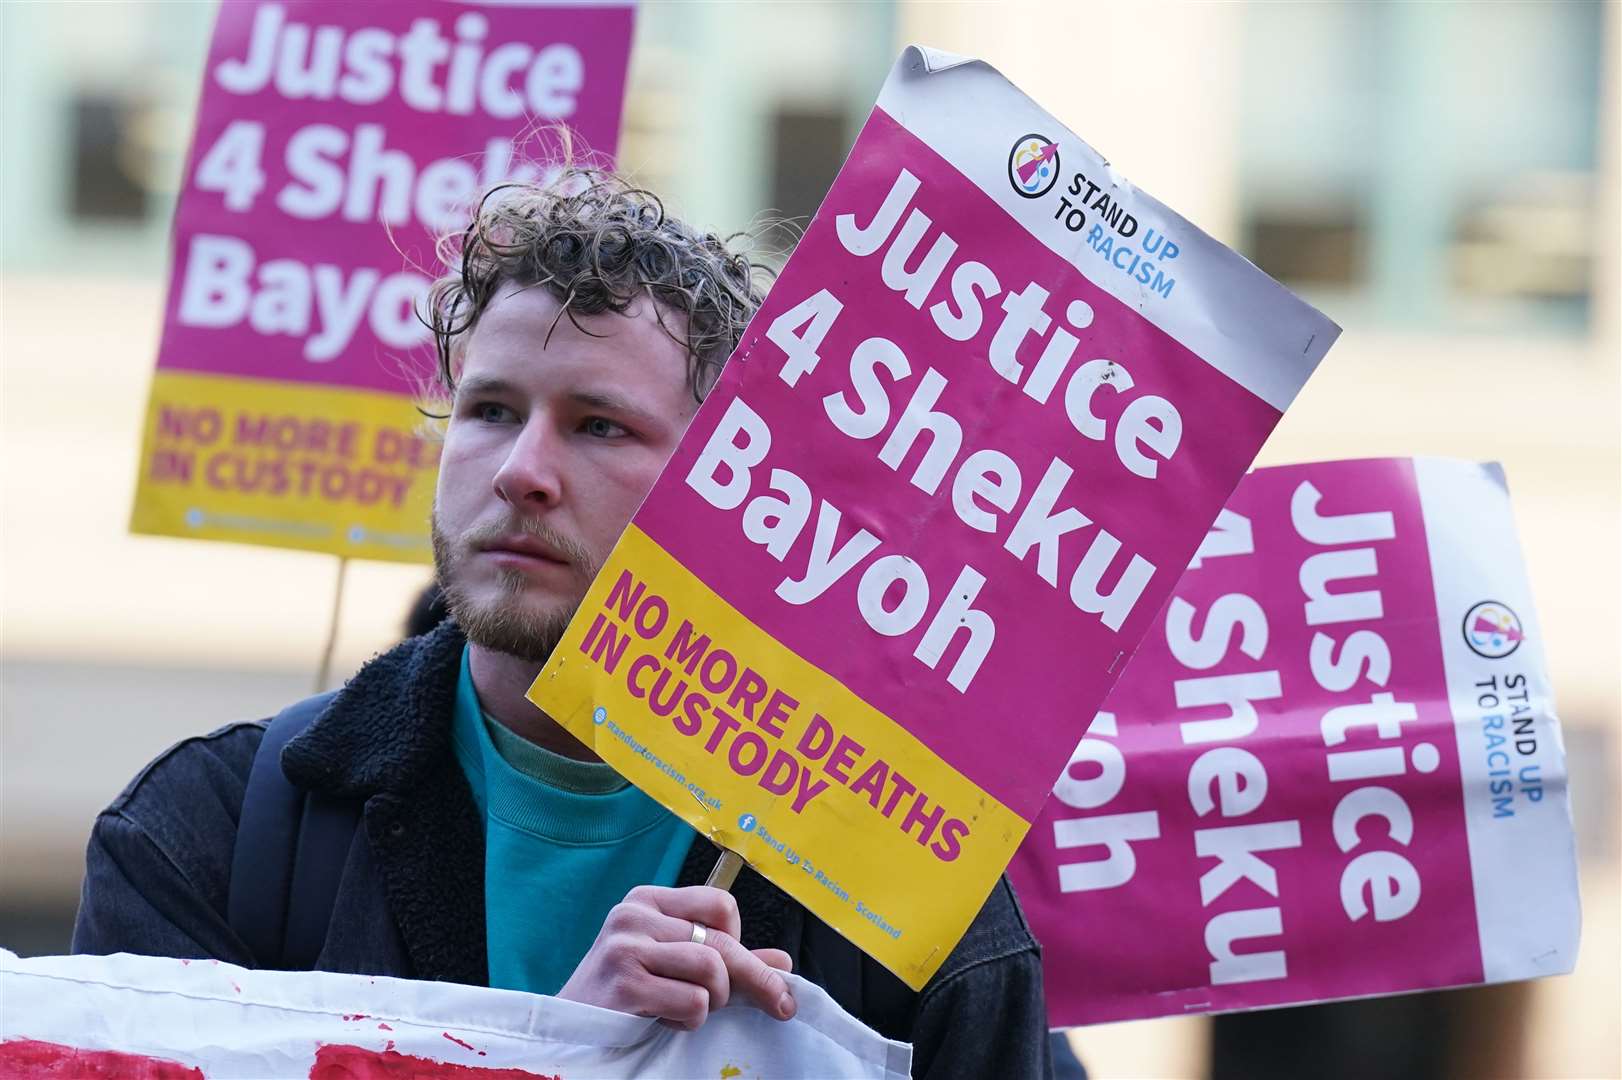 The Sheku Bayoh inquiry is examining whether race played a factor in the circumstances around his death (PA)